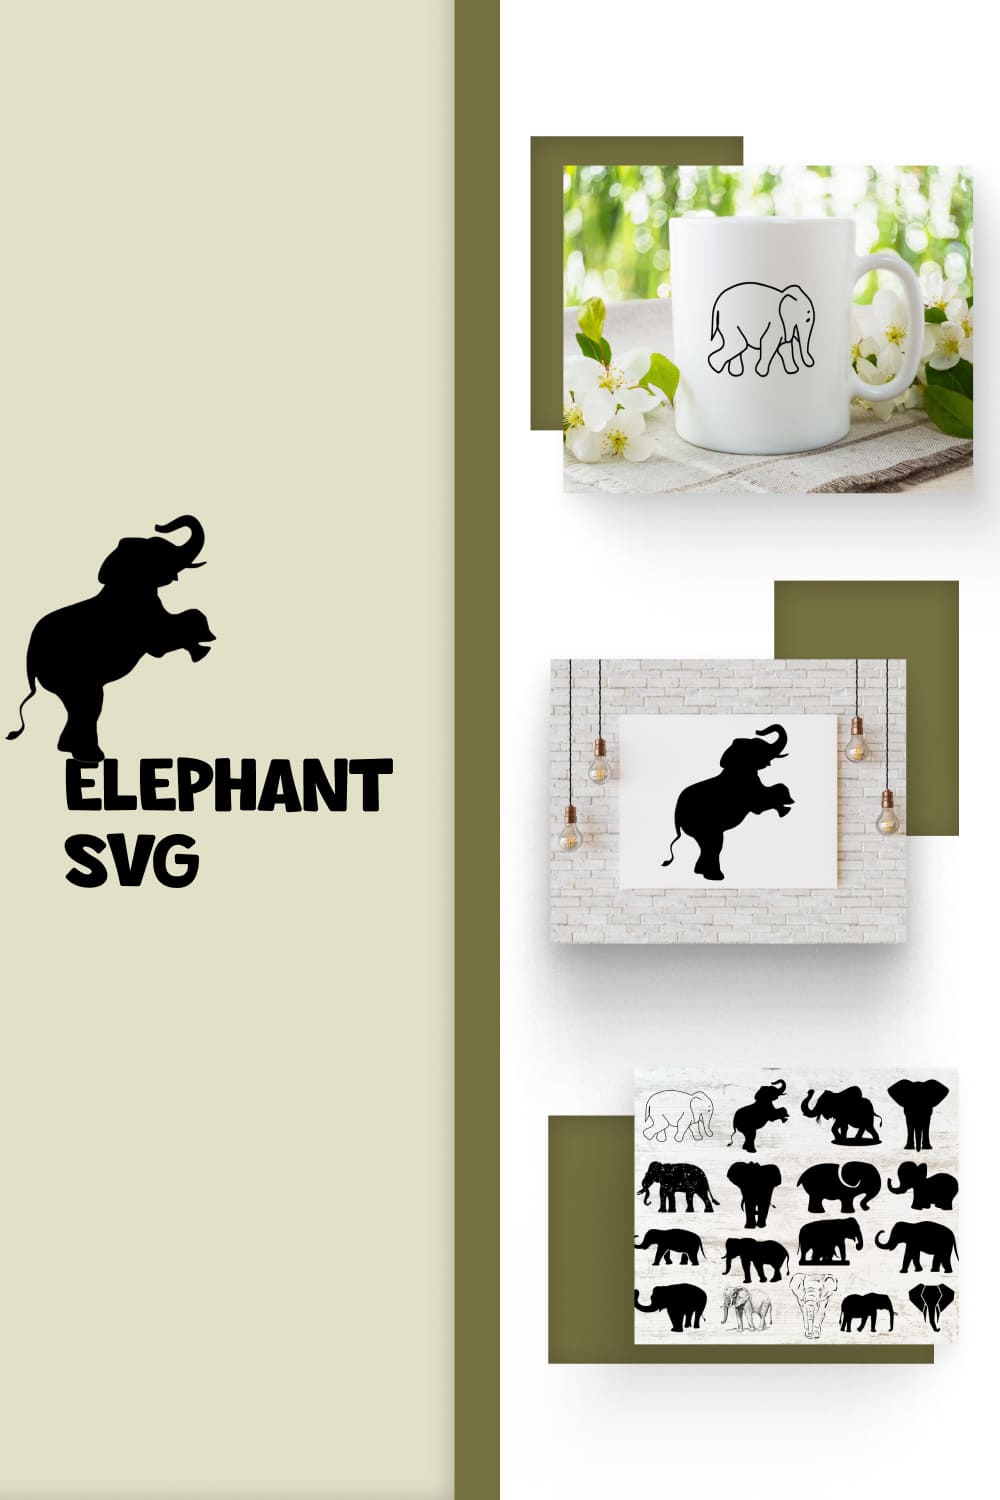 The elephant svg is a great way to decorate your walls.